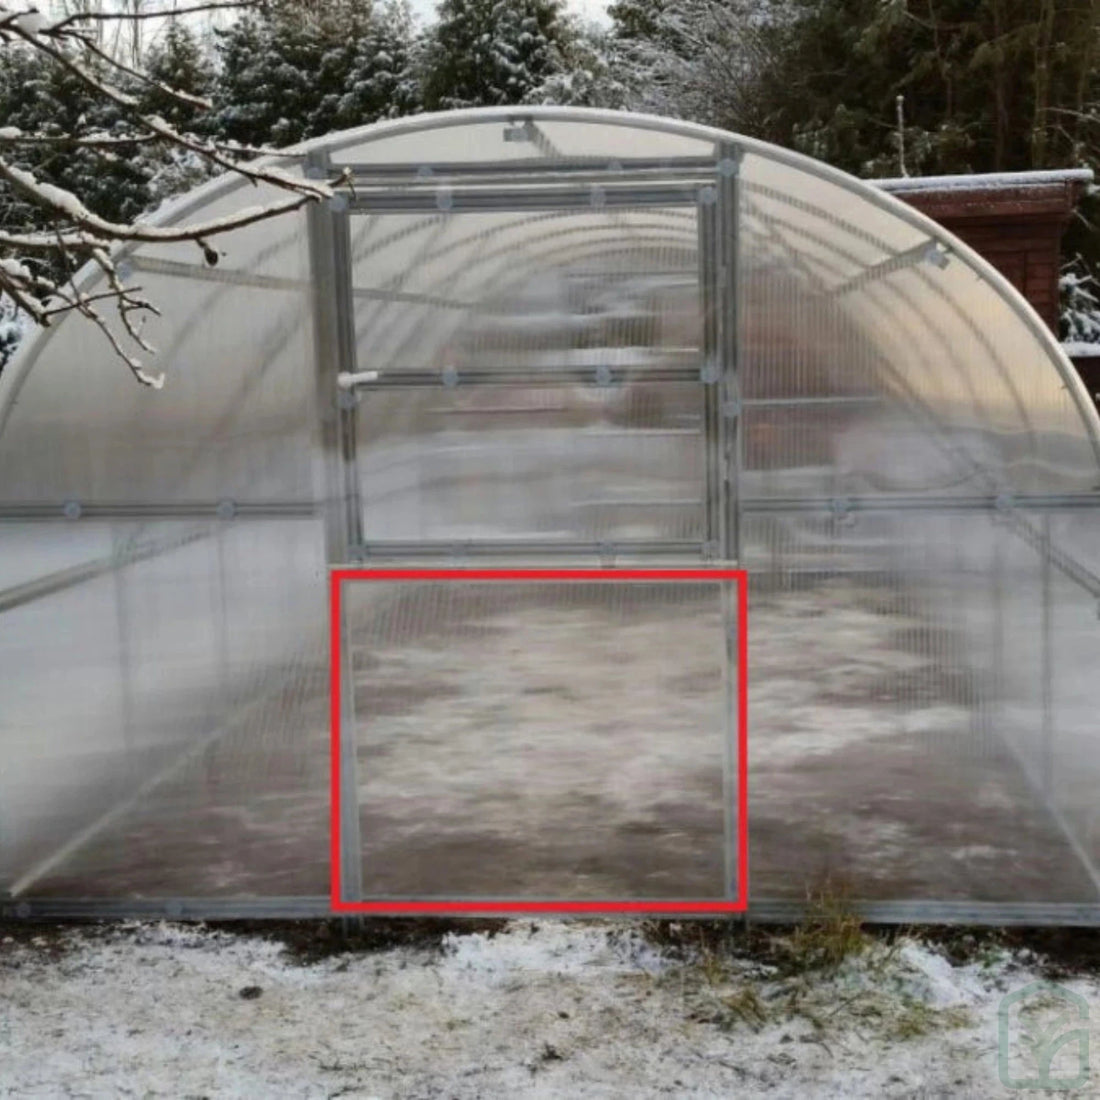 Worlds most popular greenhouse from the back highlighting where additional door should be installed